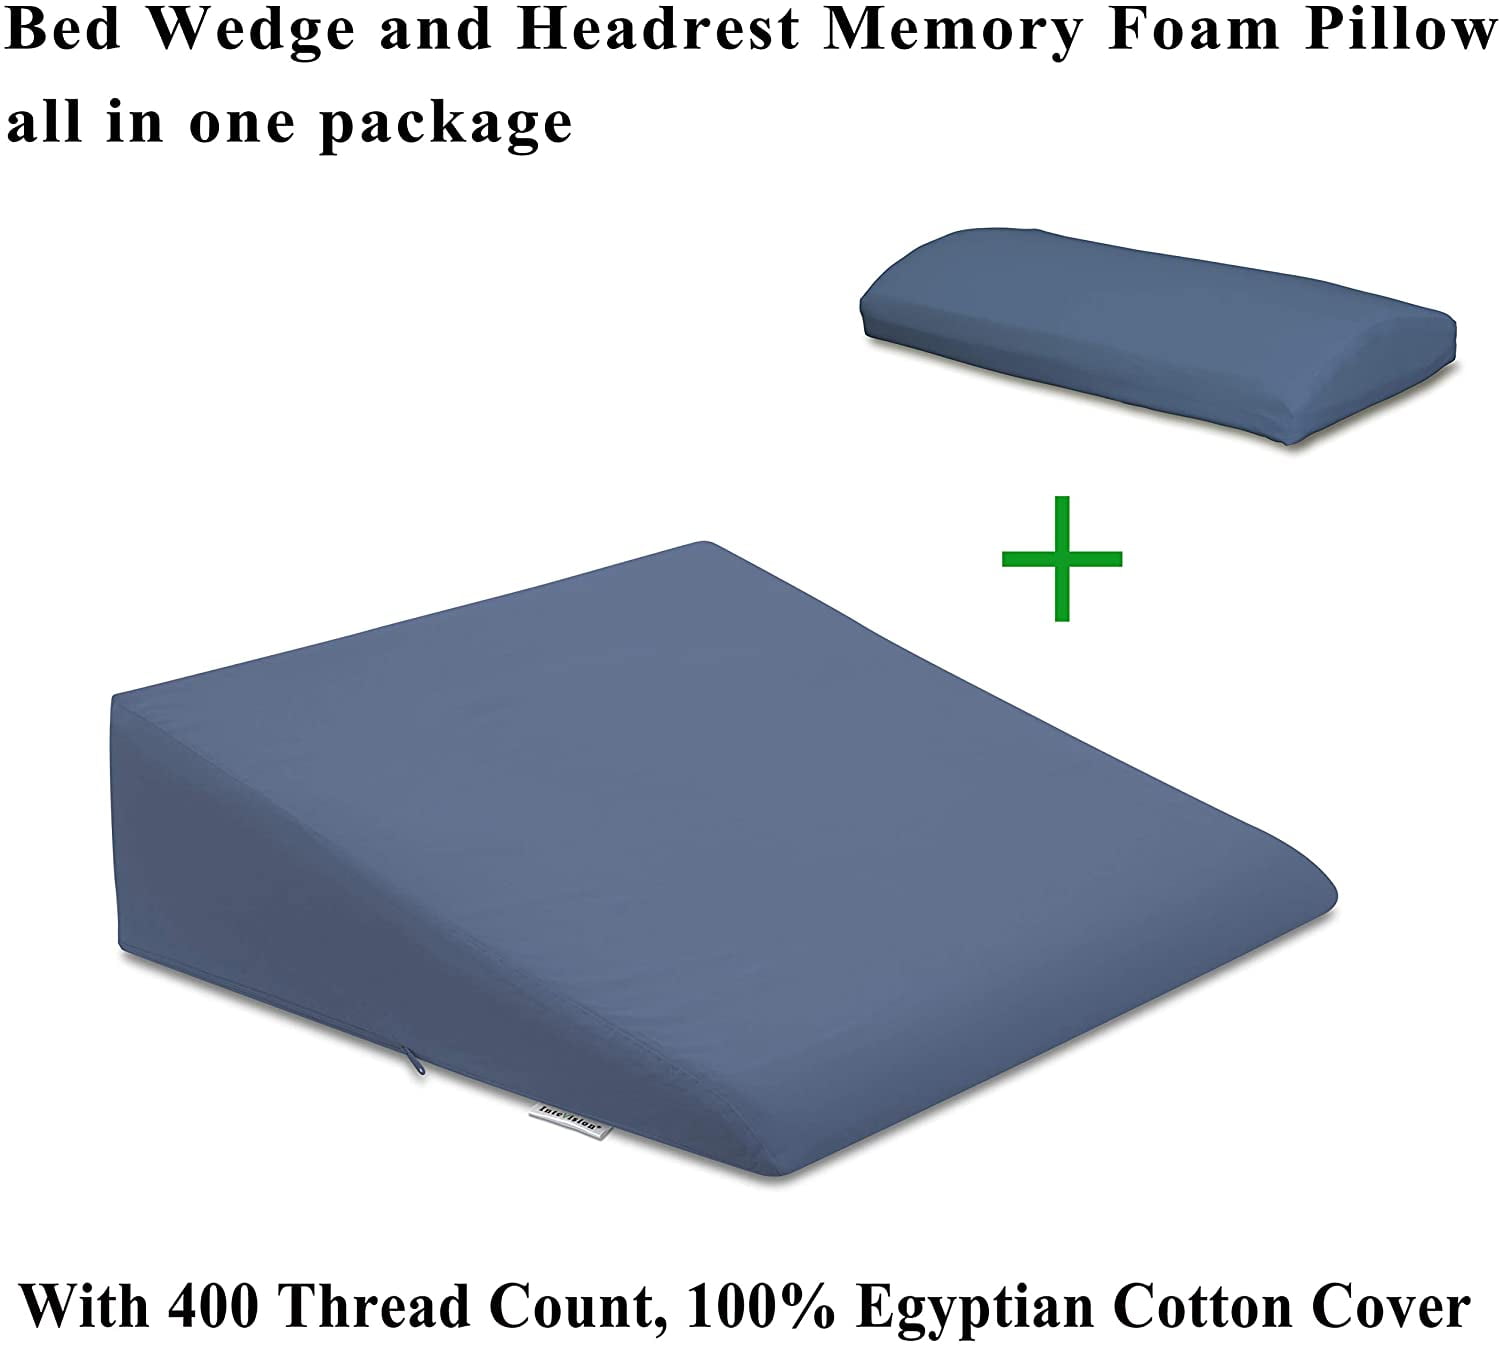 w/ 400 Thread Count 33" x 30.5" x 12" InteVision Extra Large Bed Wedge Pillow 